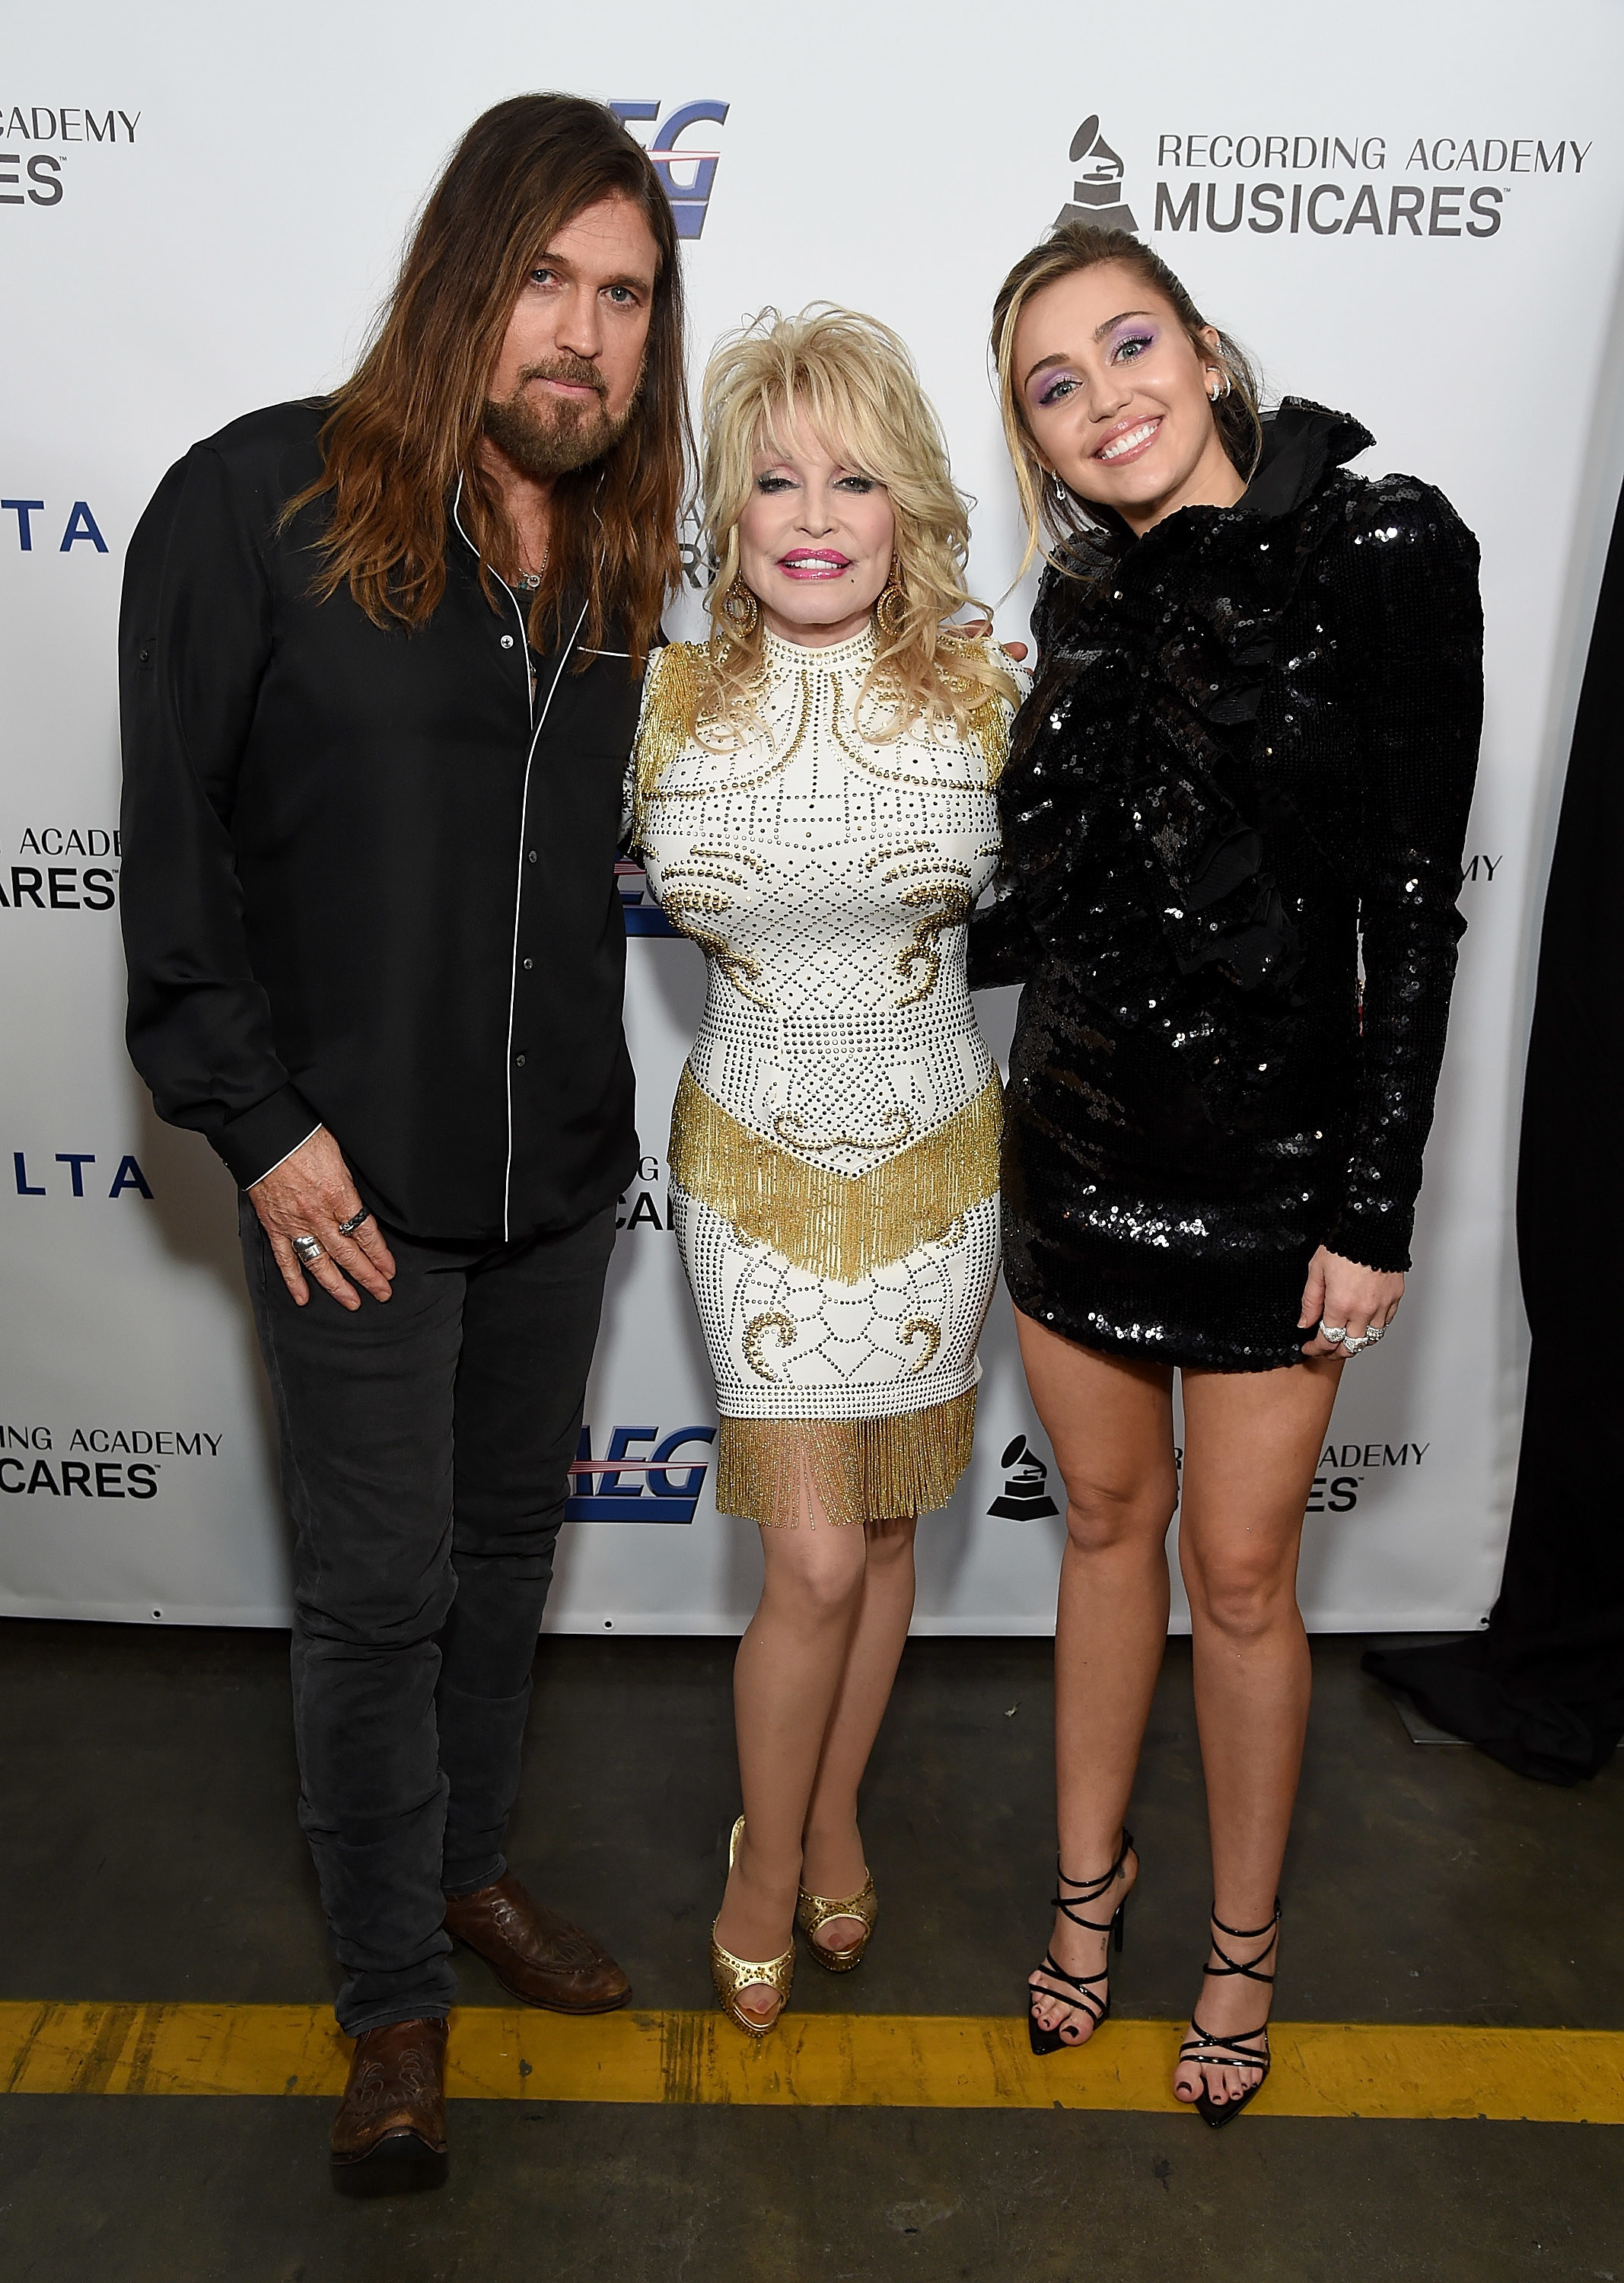 Billy Ray Cyrus, Dolly Parton, and Miley Cyrus